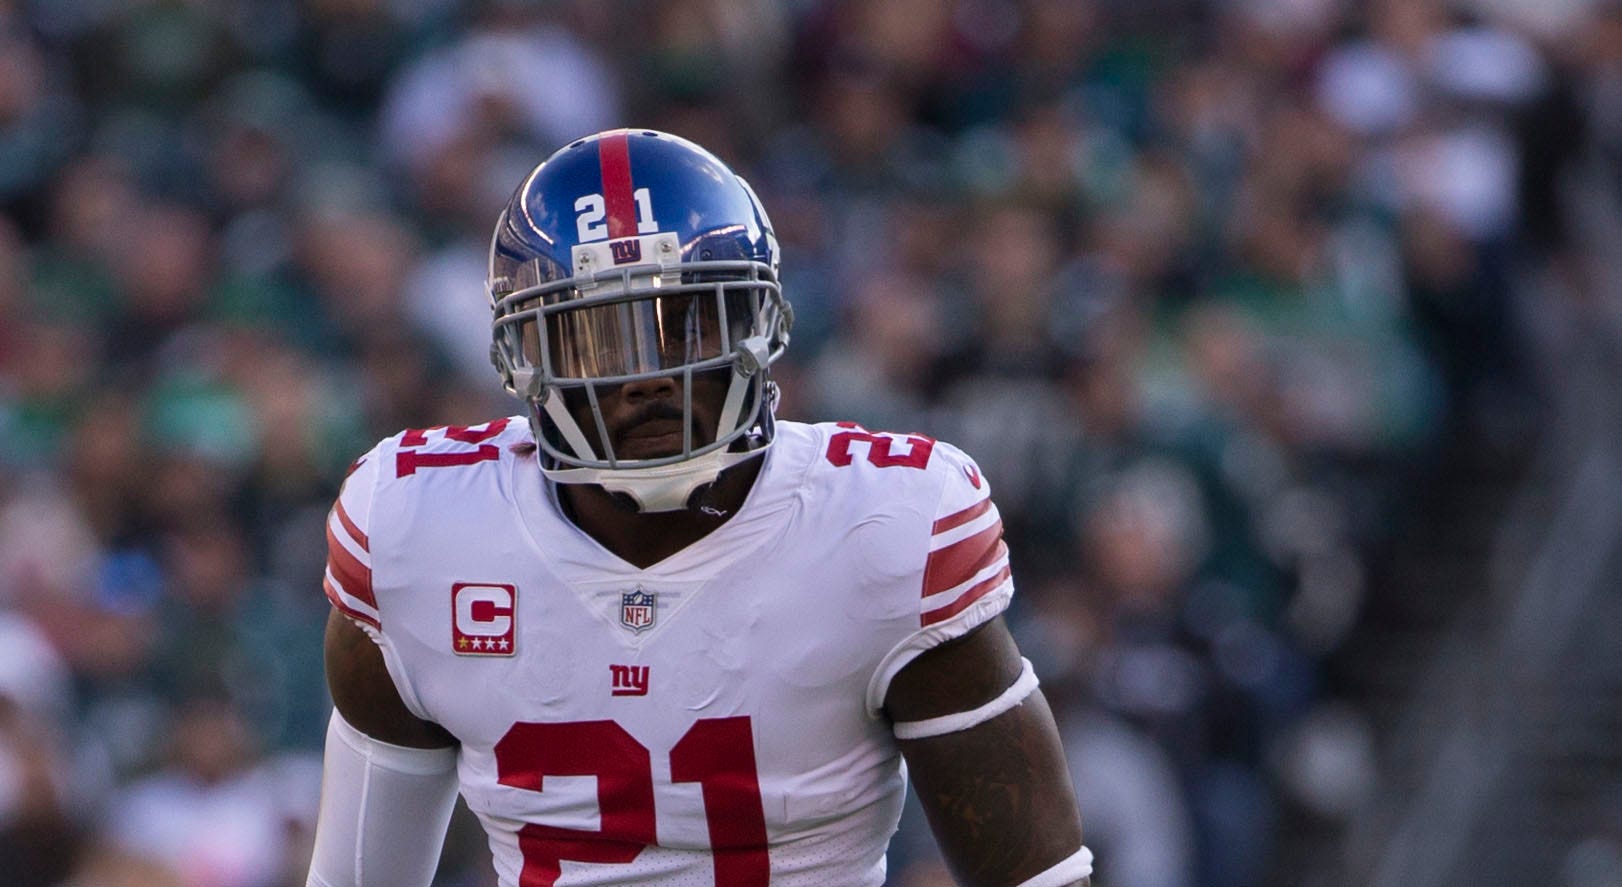 Landon Collins: 5 Fast Facts You Need to Know